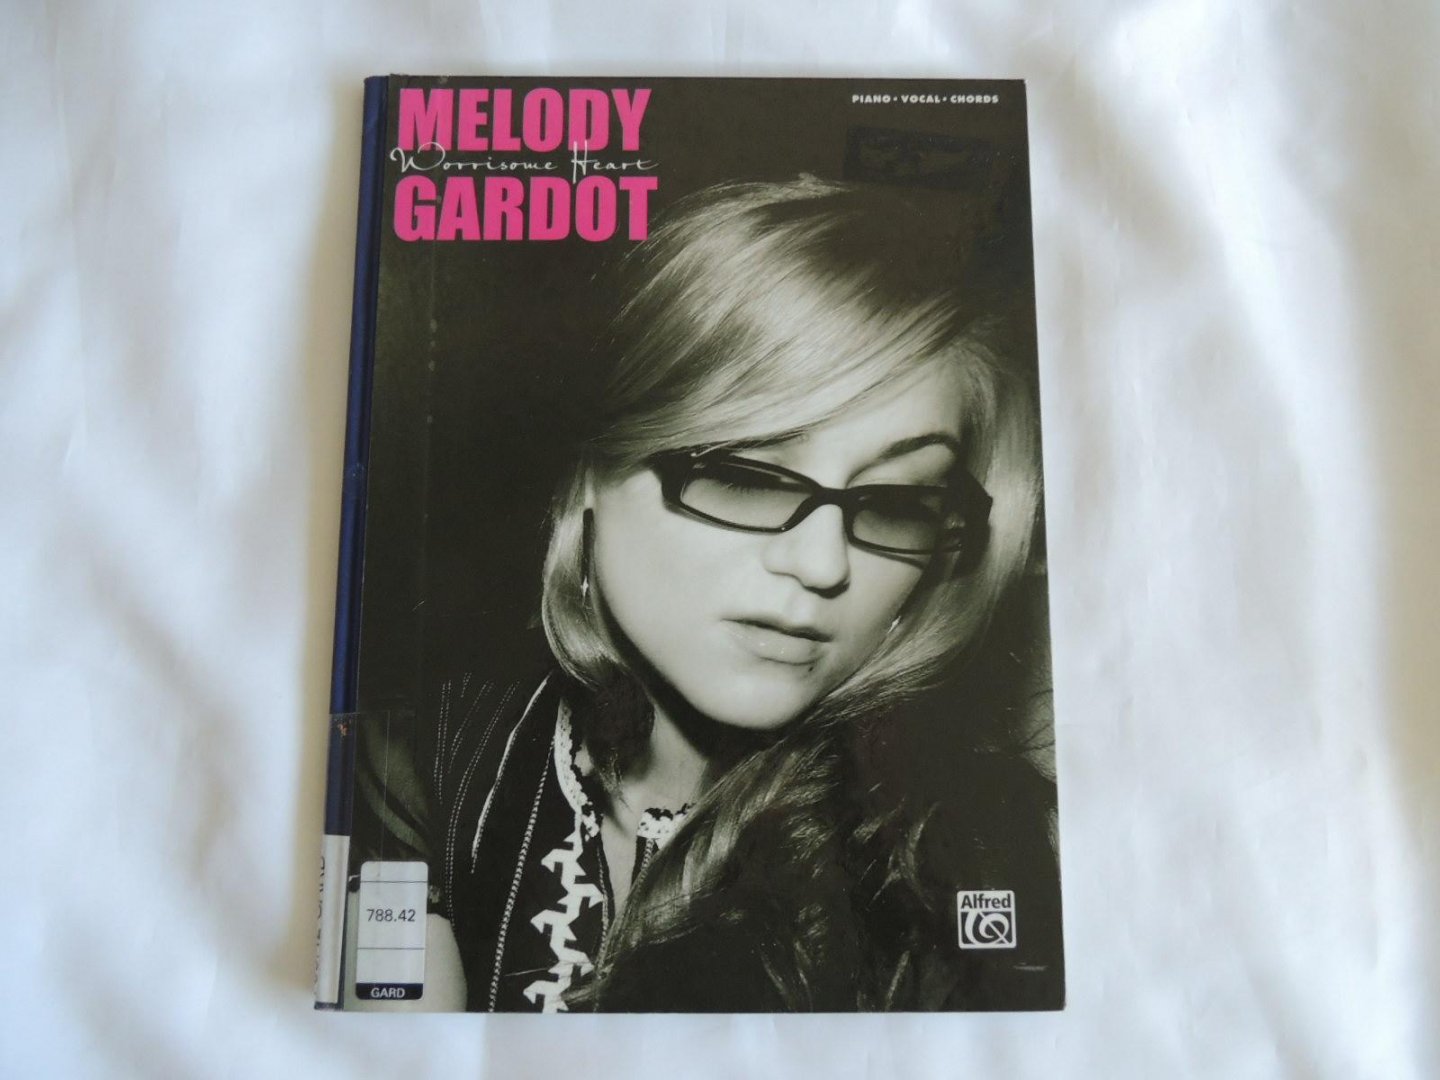 Gardot, Melody - Worrisome Heart For Piano Vocal Chords Book - Titles: All That I Need Is Love * Gone * Goodnite * Love Me Like a River Does * One Day * Quiet Fire * Some Lessons * Sweet Memory *  Worrisome Heart